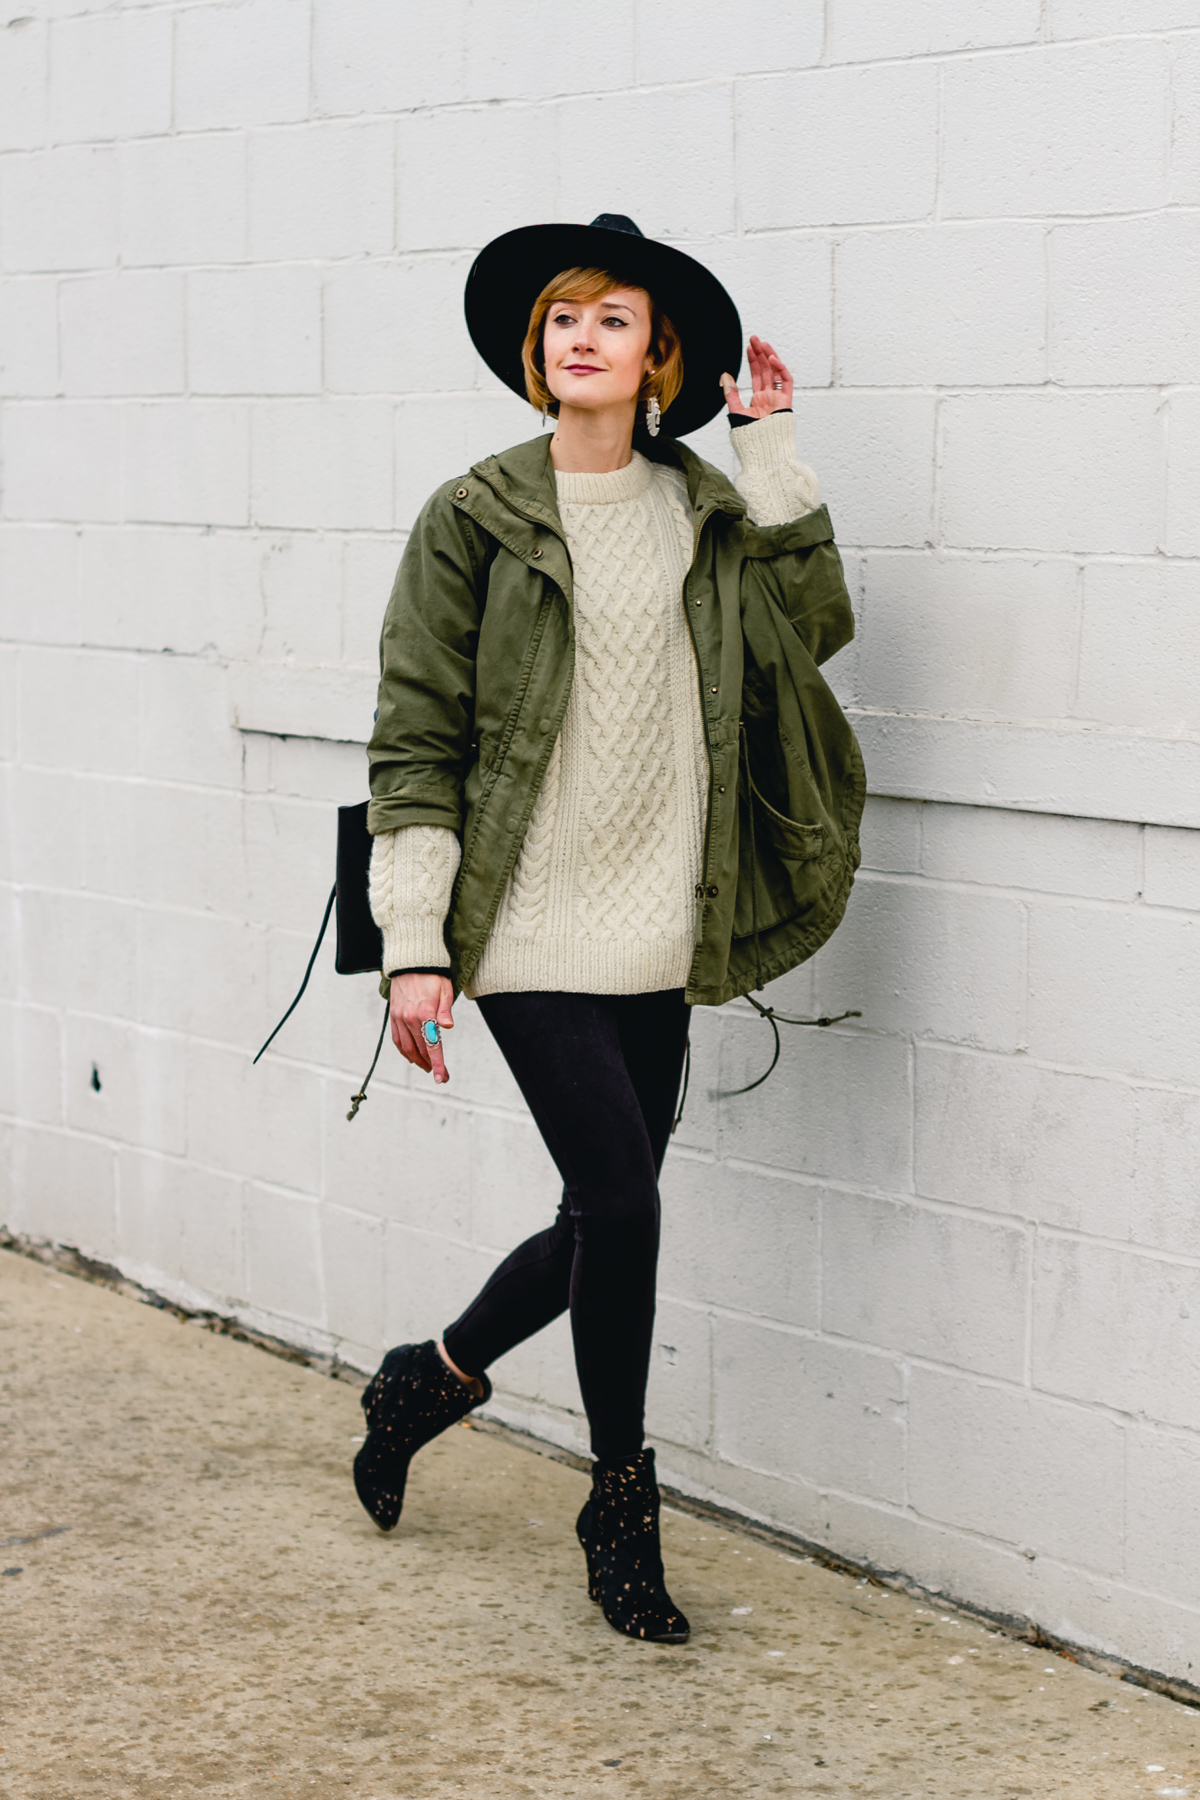 layered anorak, fisherman's knit, and suede leggings